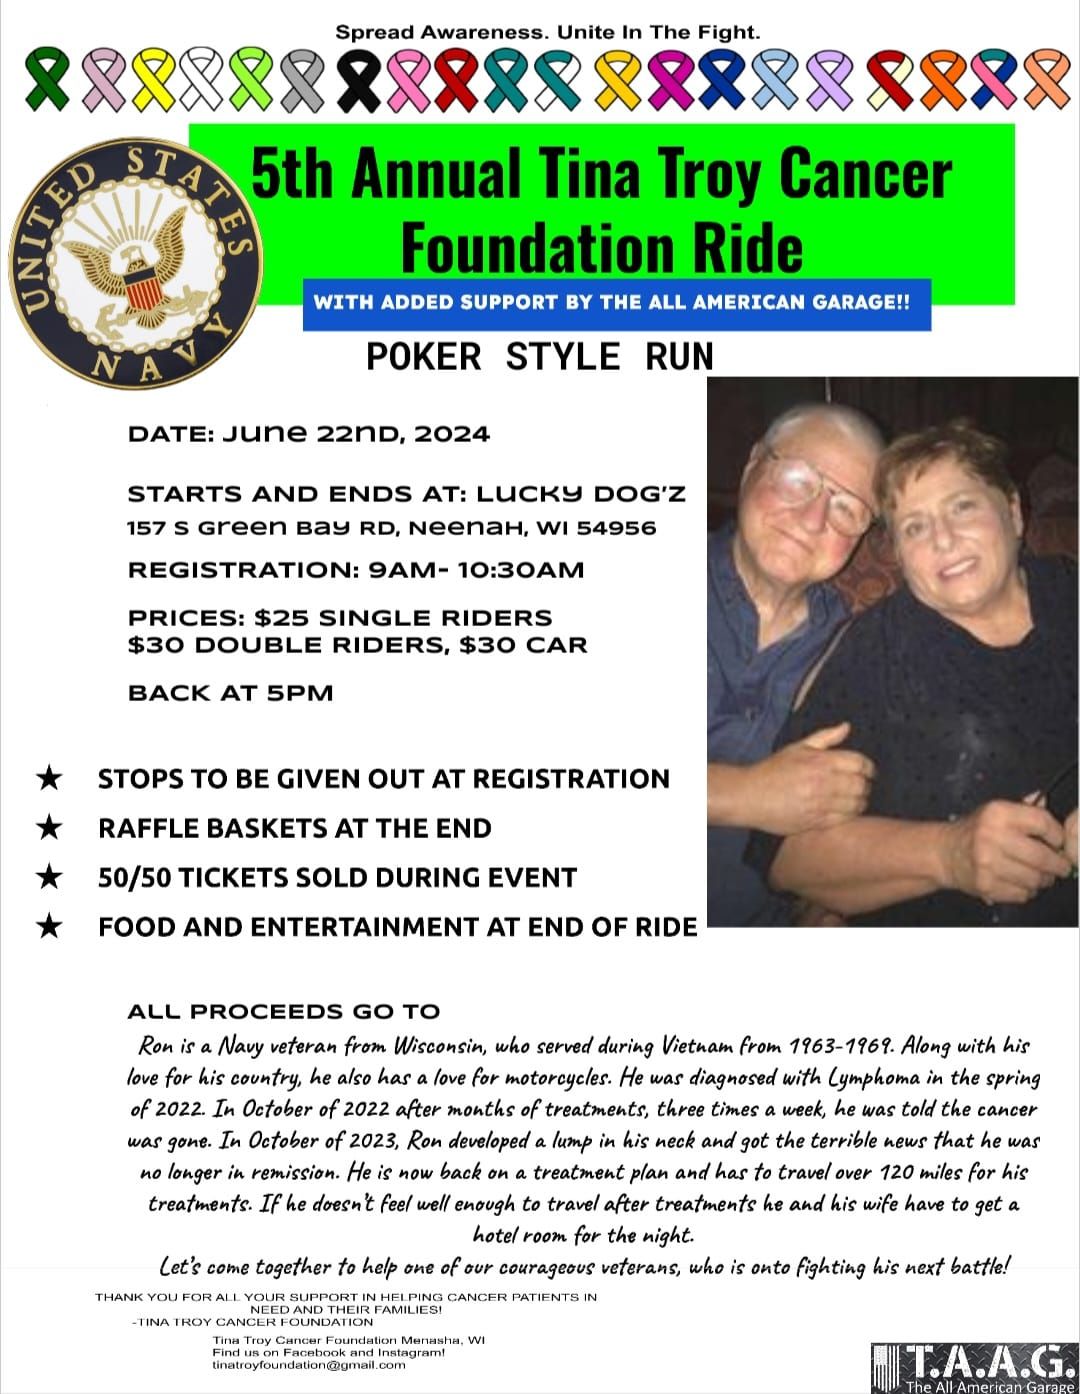 5th Annual Tina Troy Cancer Foundation Ride